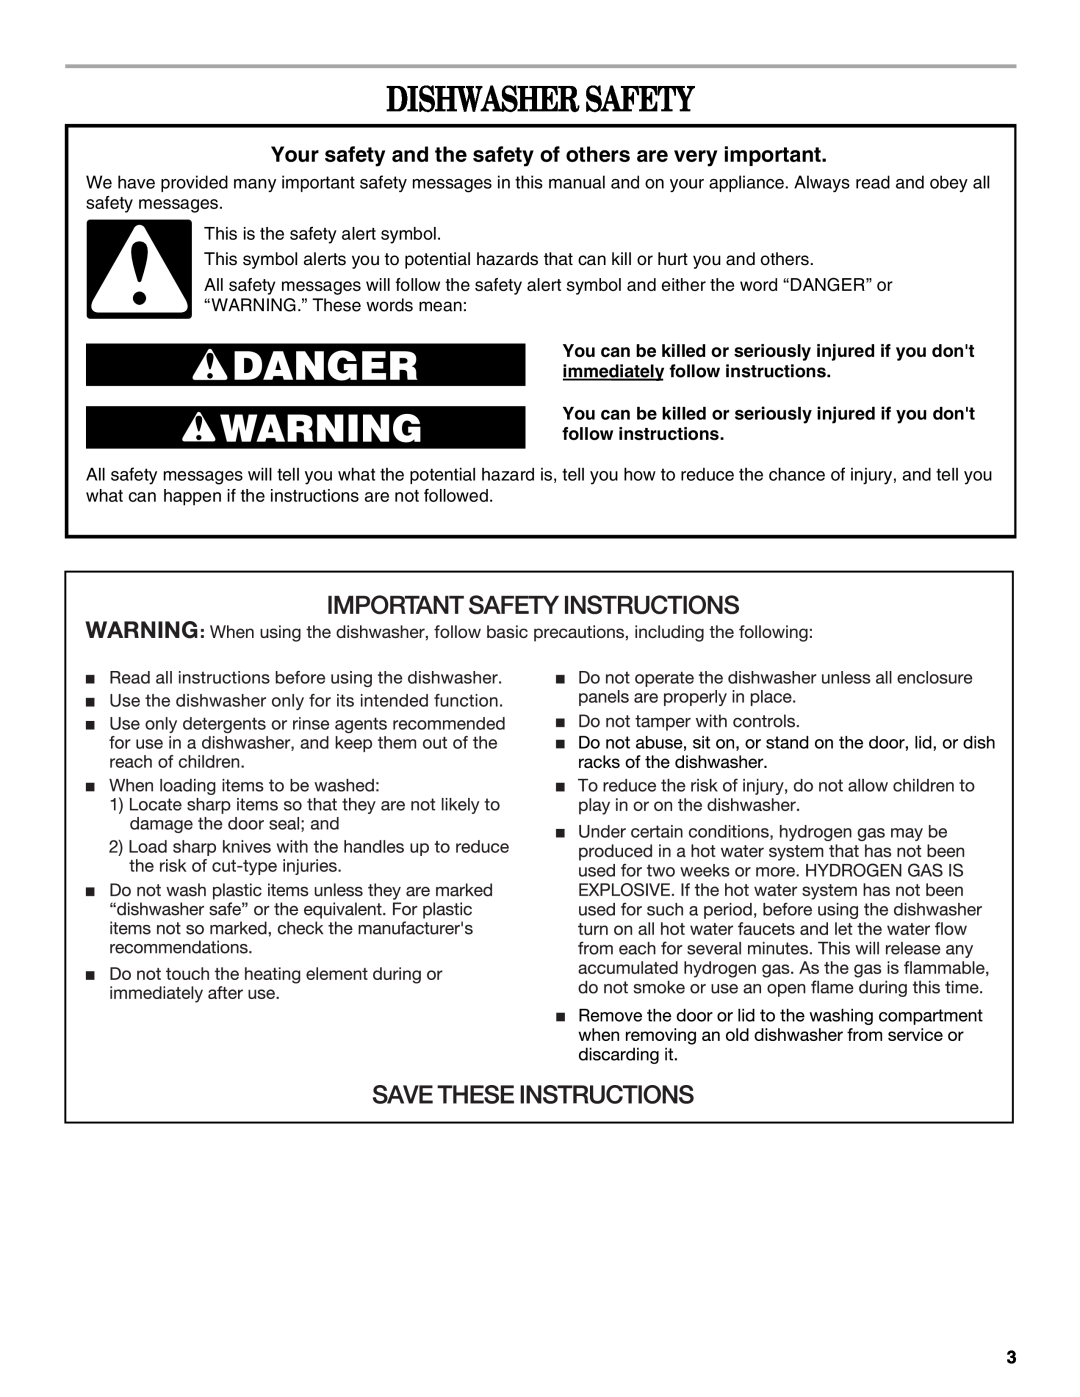 Whirlpool 810 manual Dishwasher Safety, Your safety and the safety of others are very important 